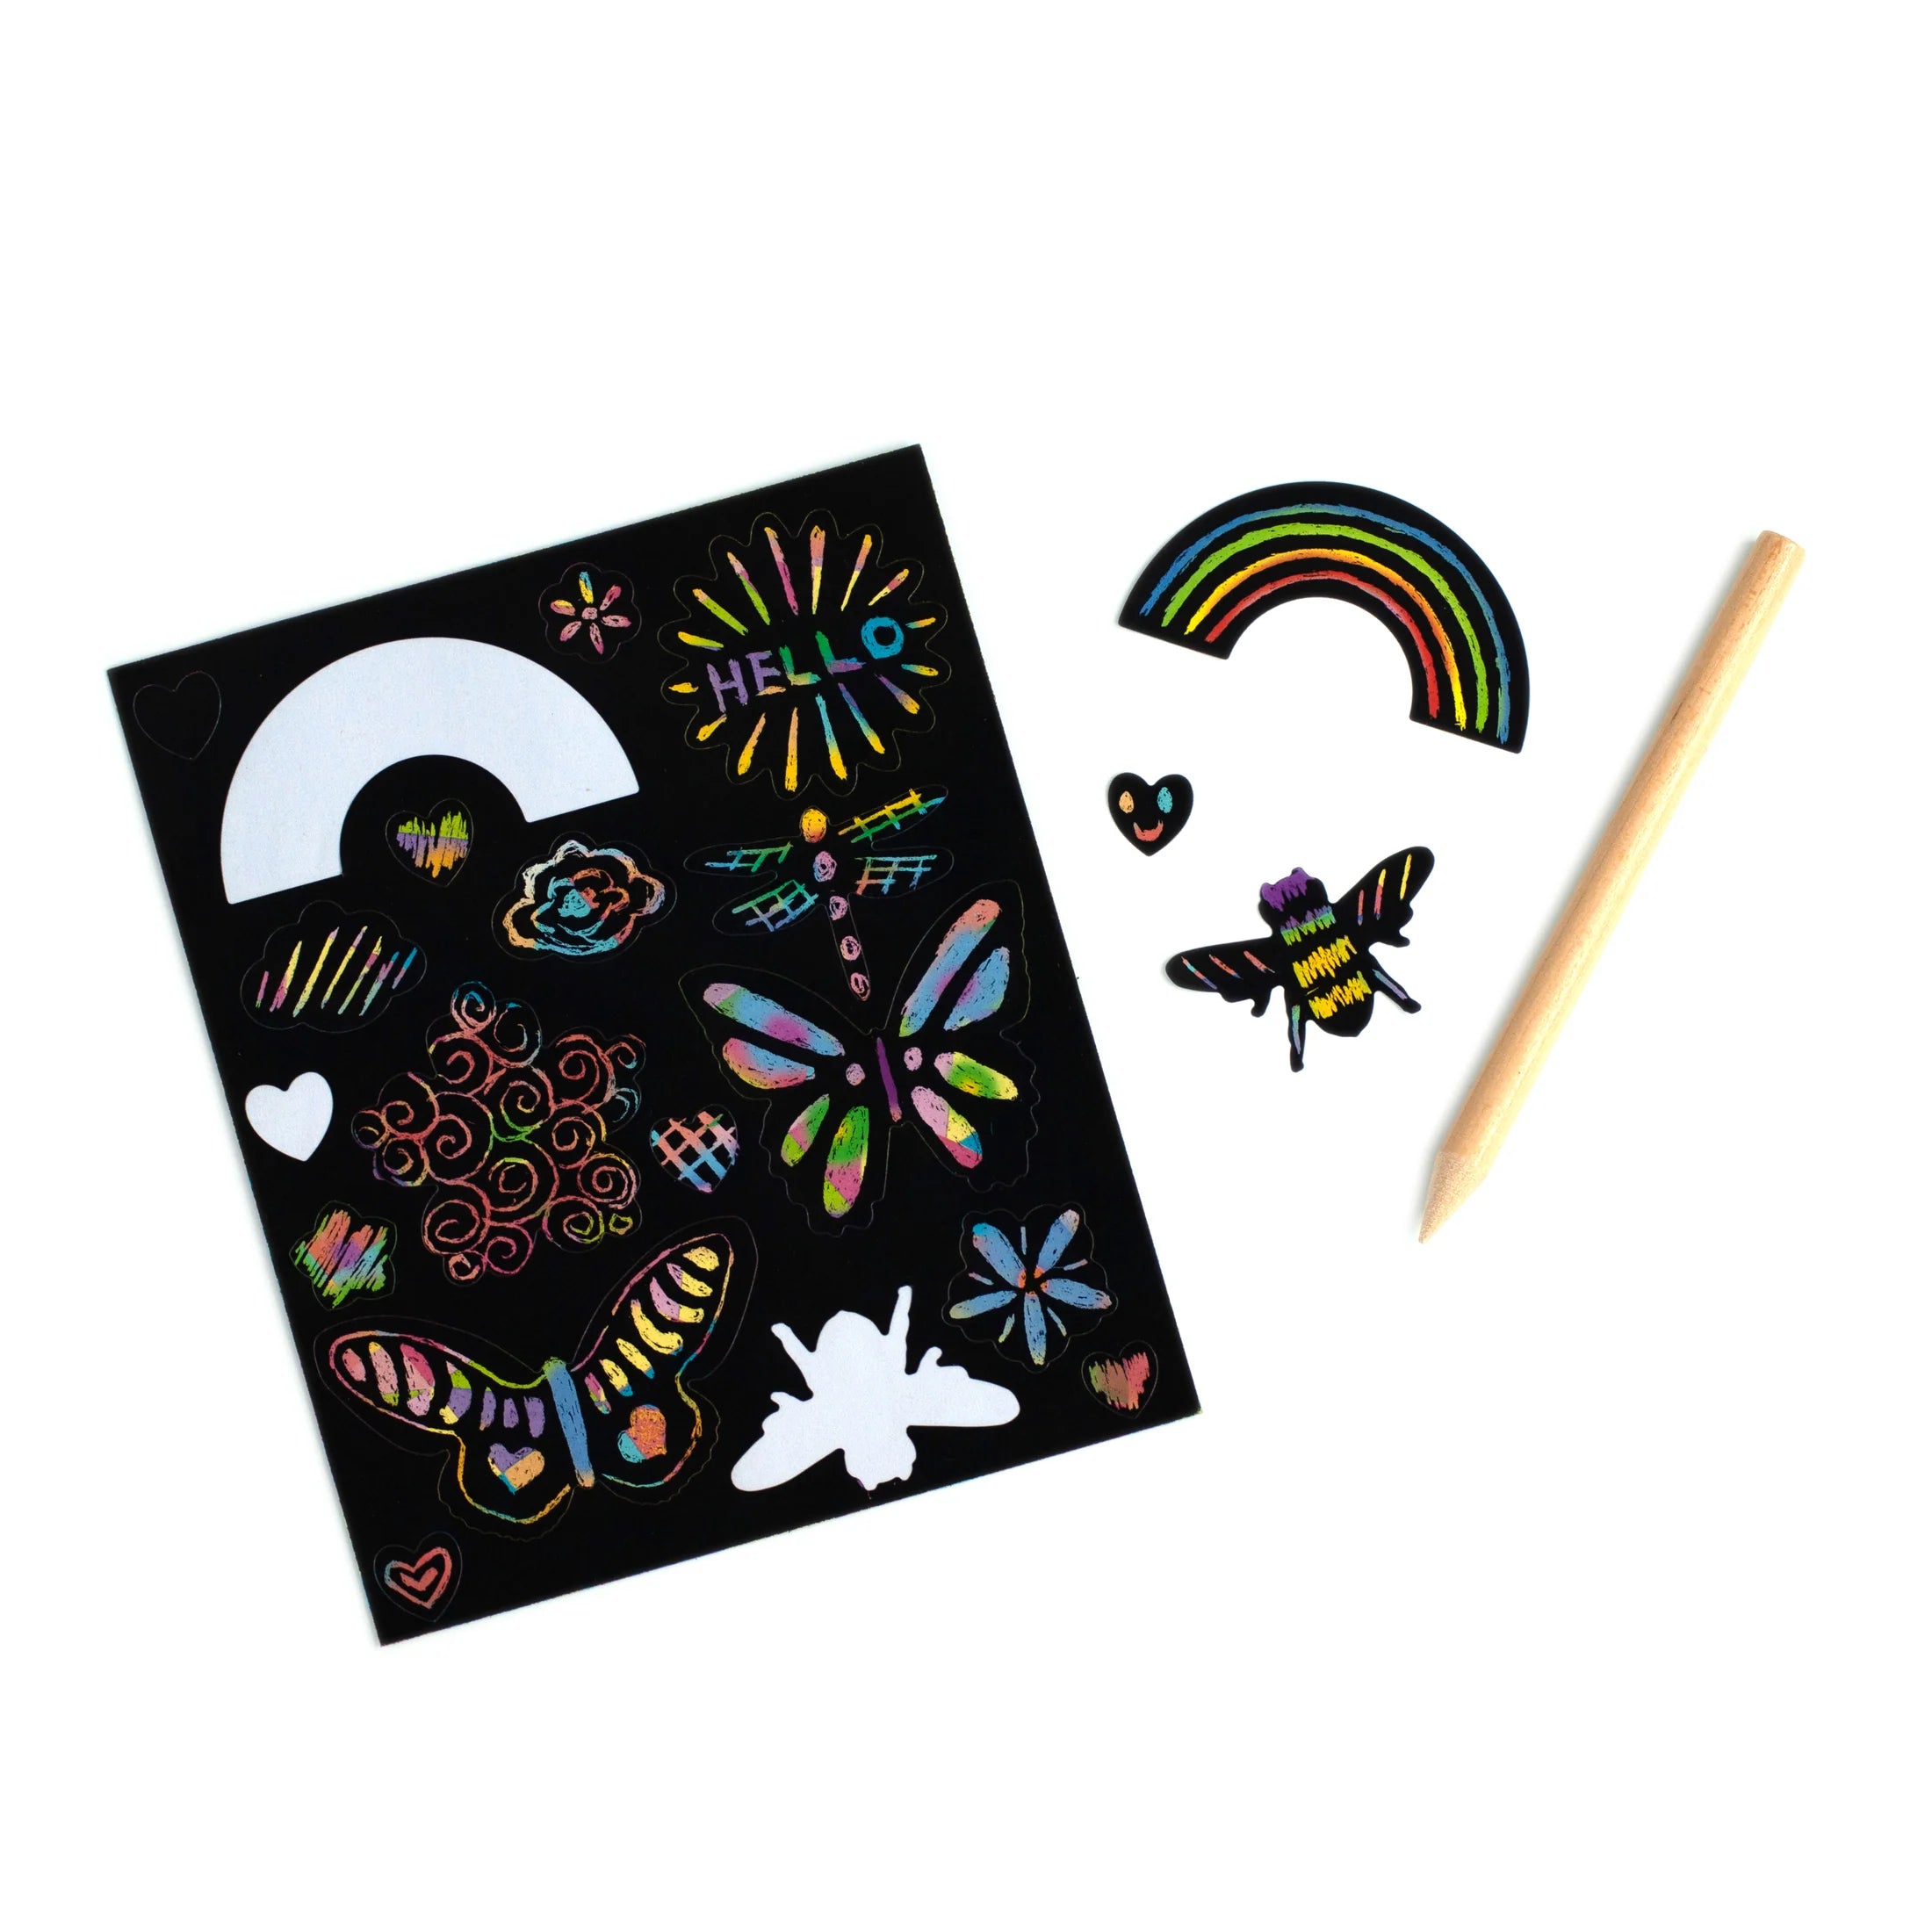 Rainbow and Friends Scratch Paper Stickers